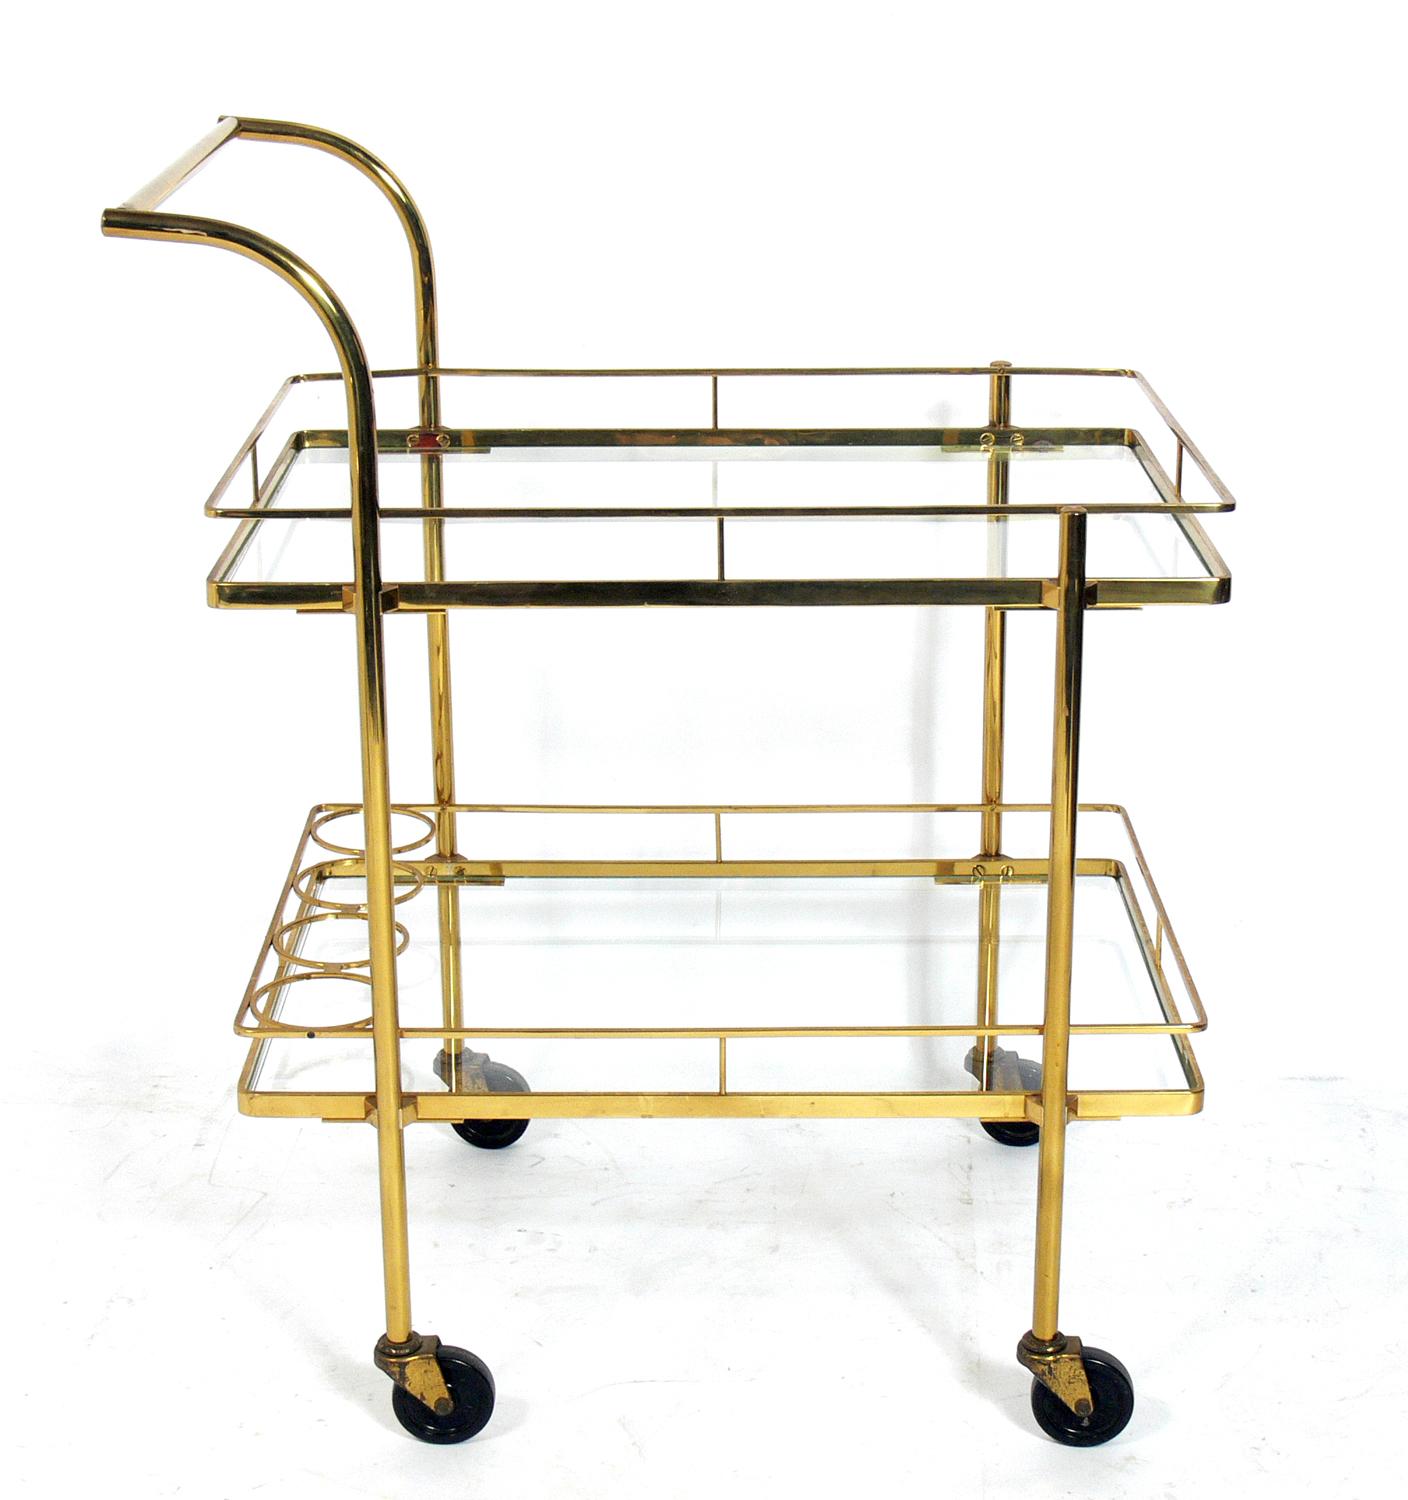 Midcentury brass bar cart, probably Italian, circa 1960s. It is a versatile size and can be used as a bar or serving cart or as extra rolling storage in an office. It has four bottle holders at the bottom and two large glass shelves.